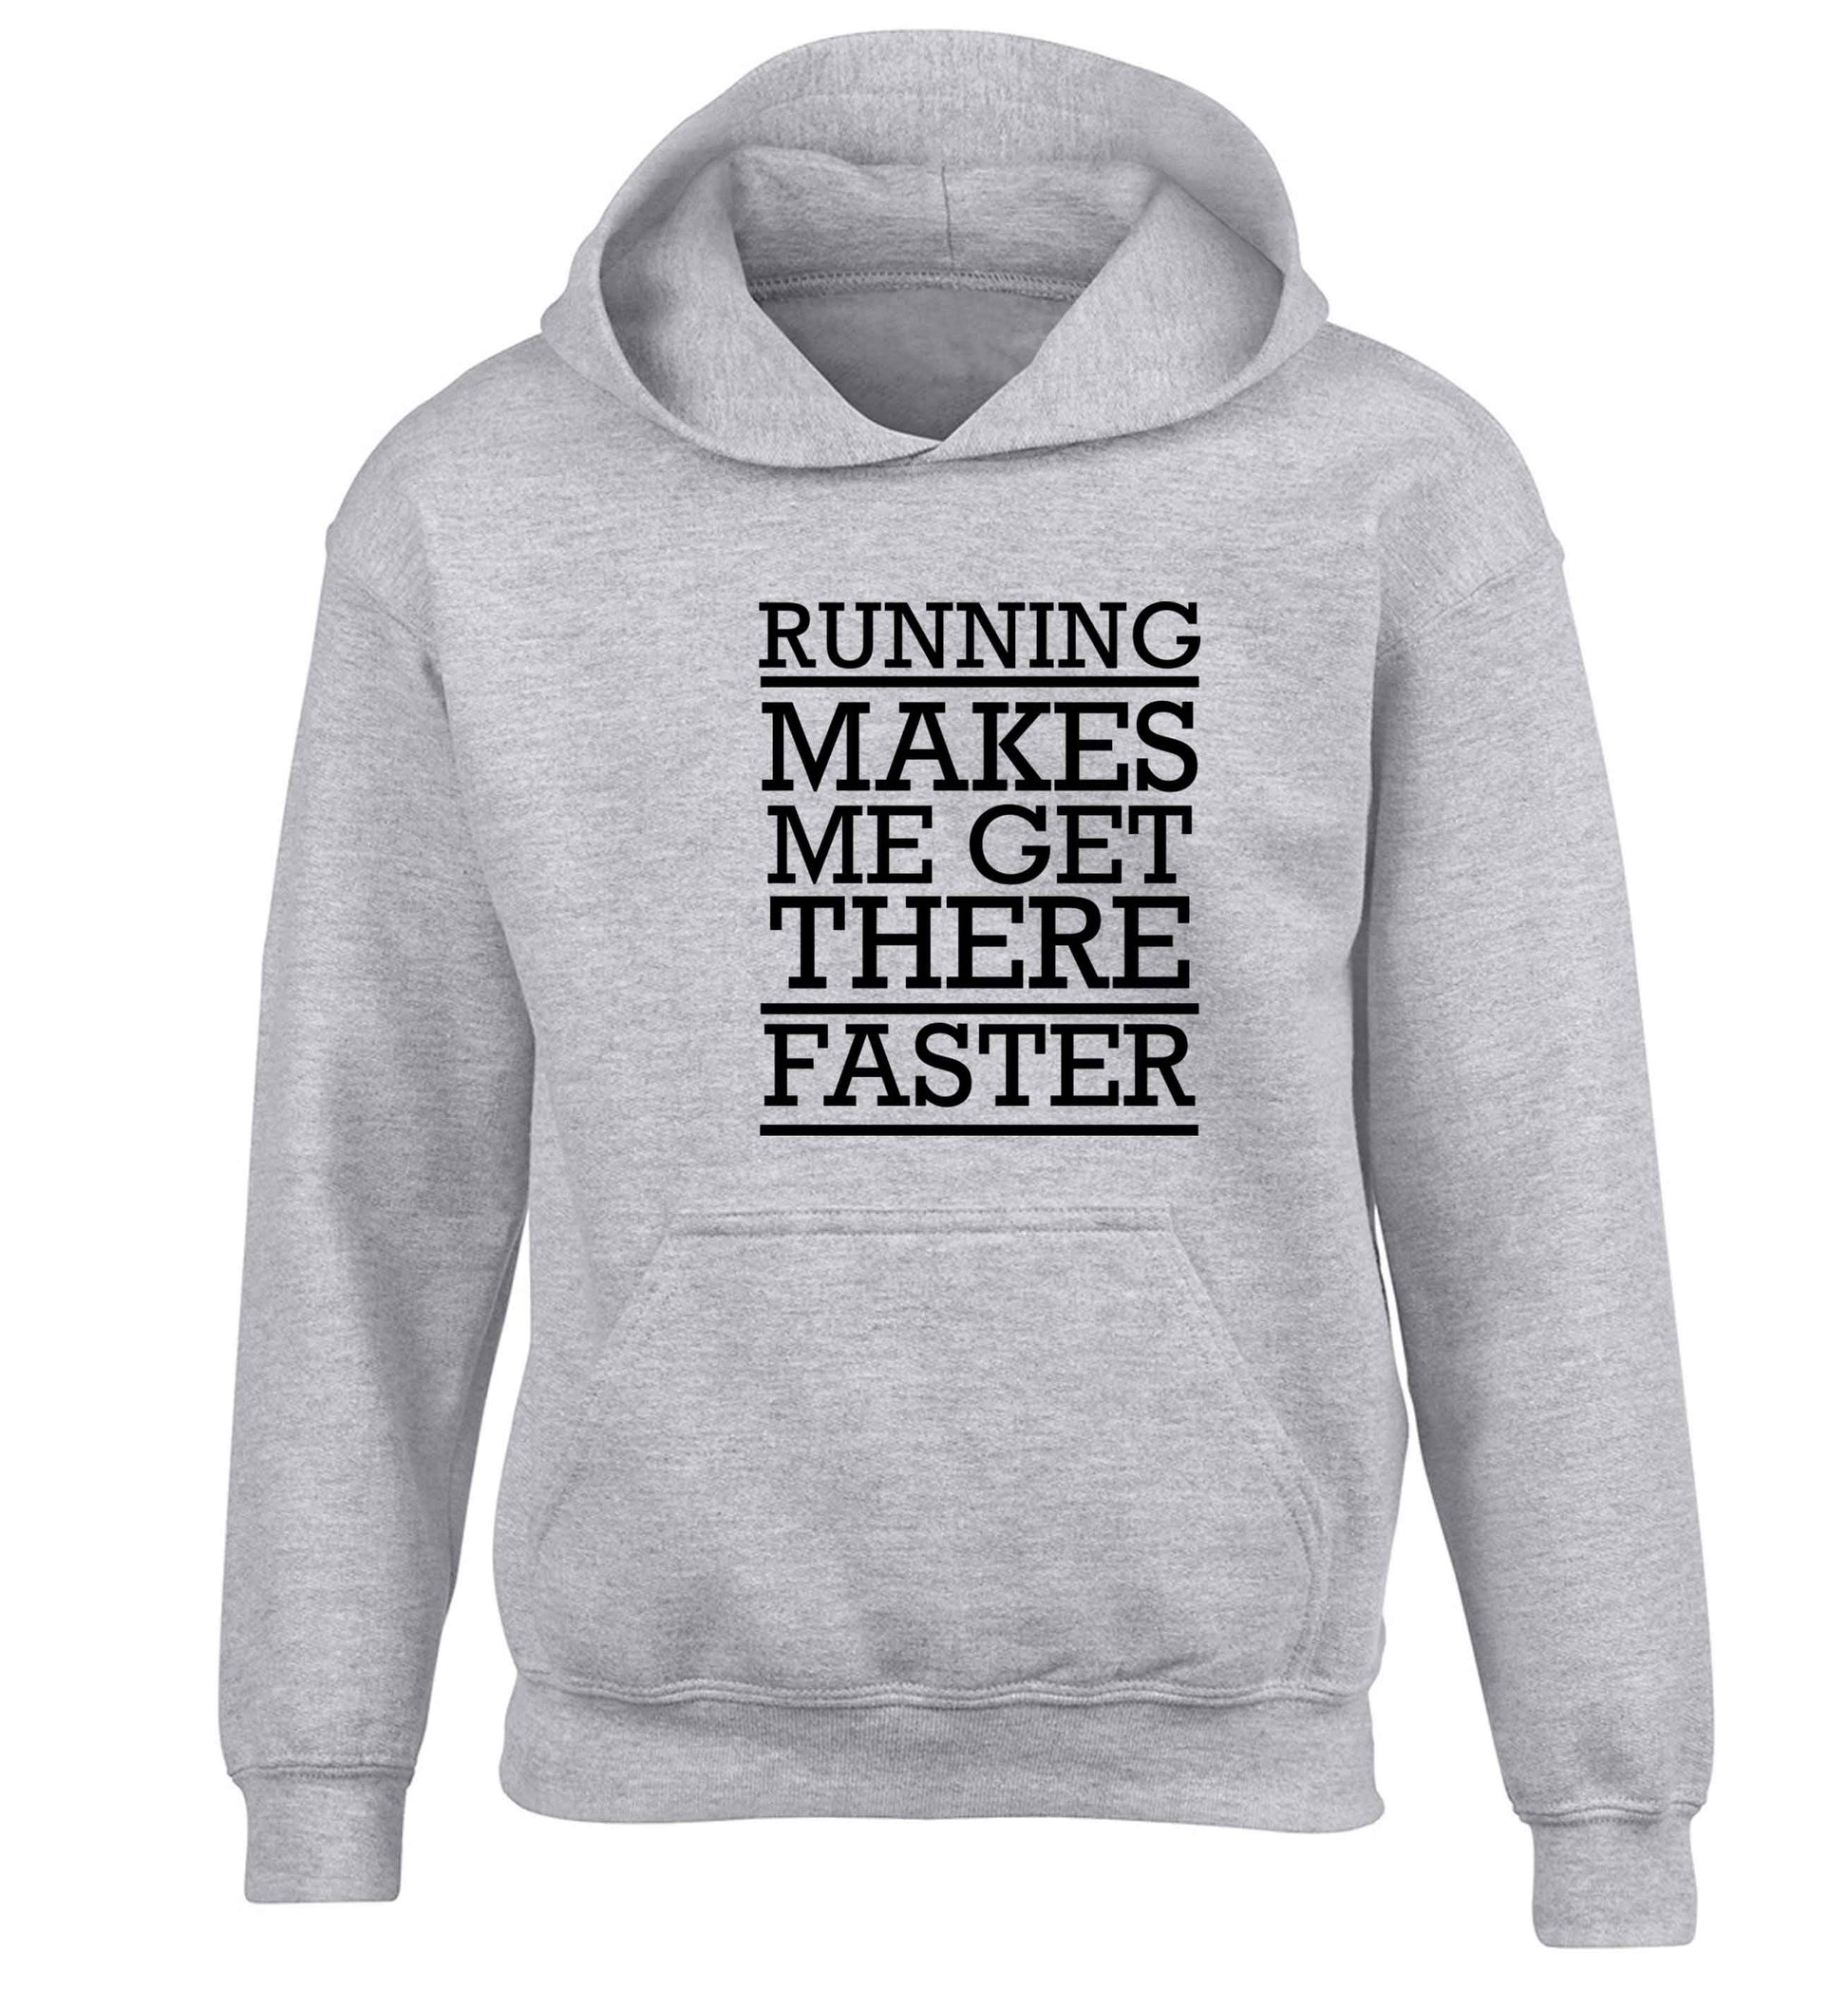 Running makes me get there faster children's grey hoodie 12-13 Years